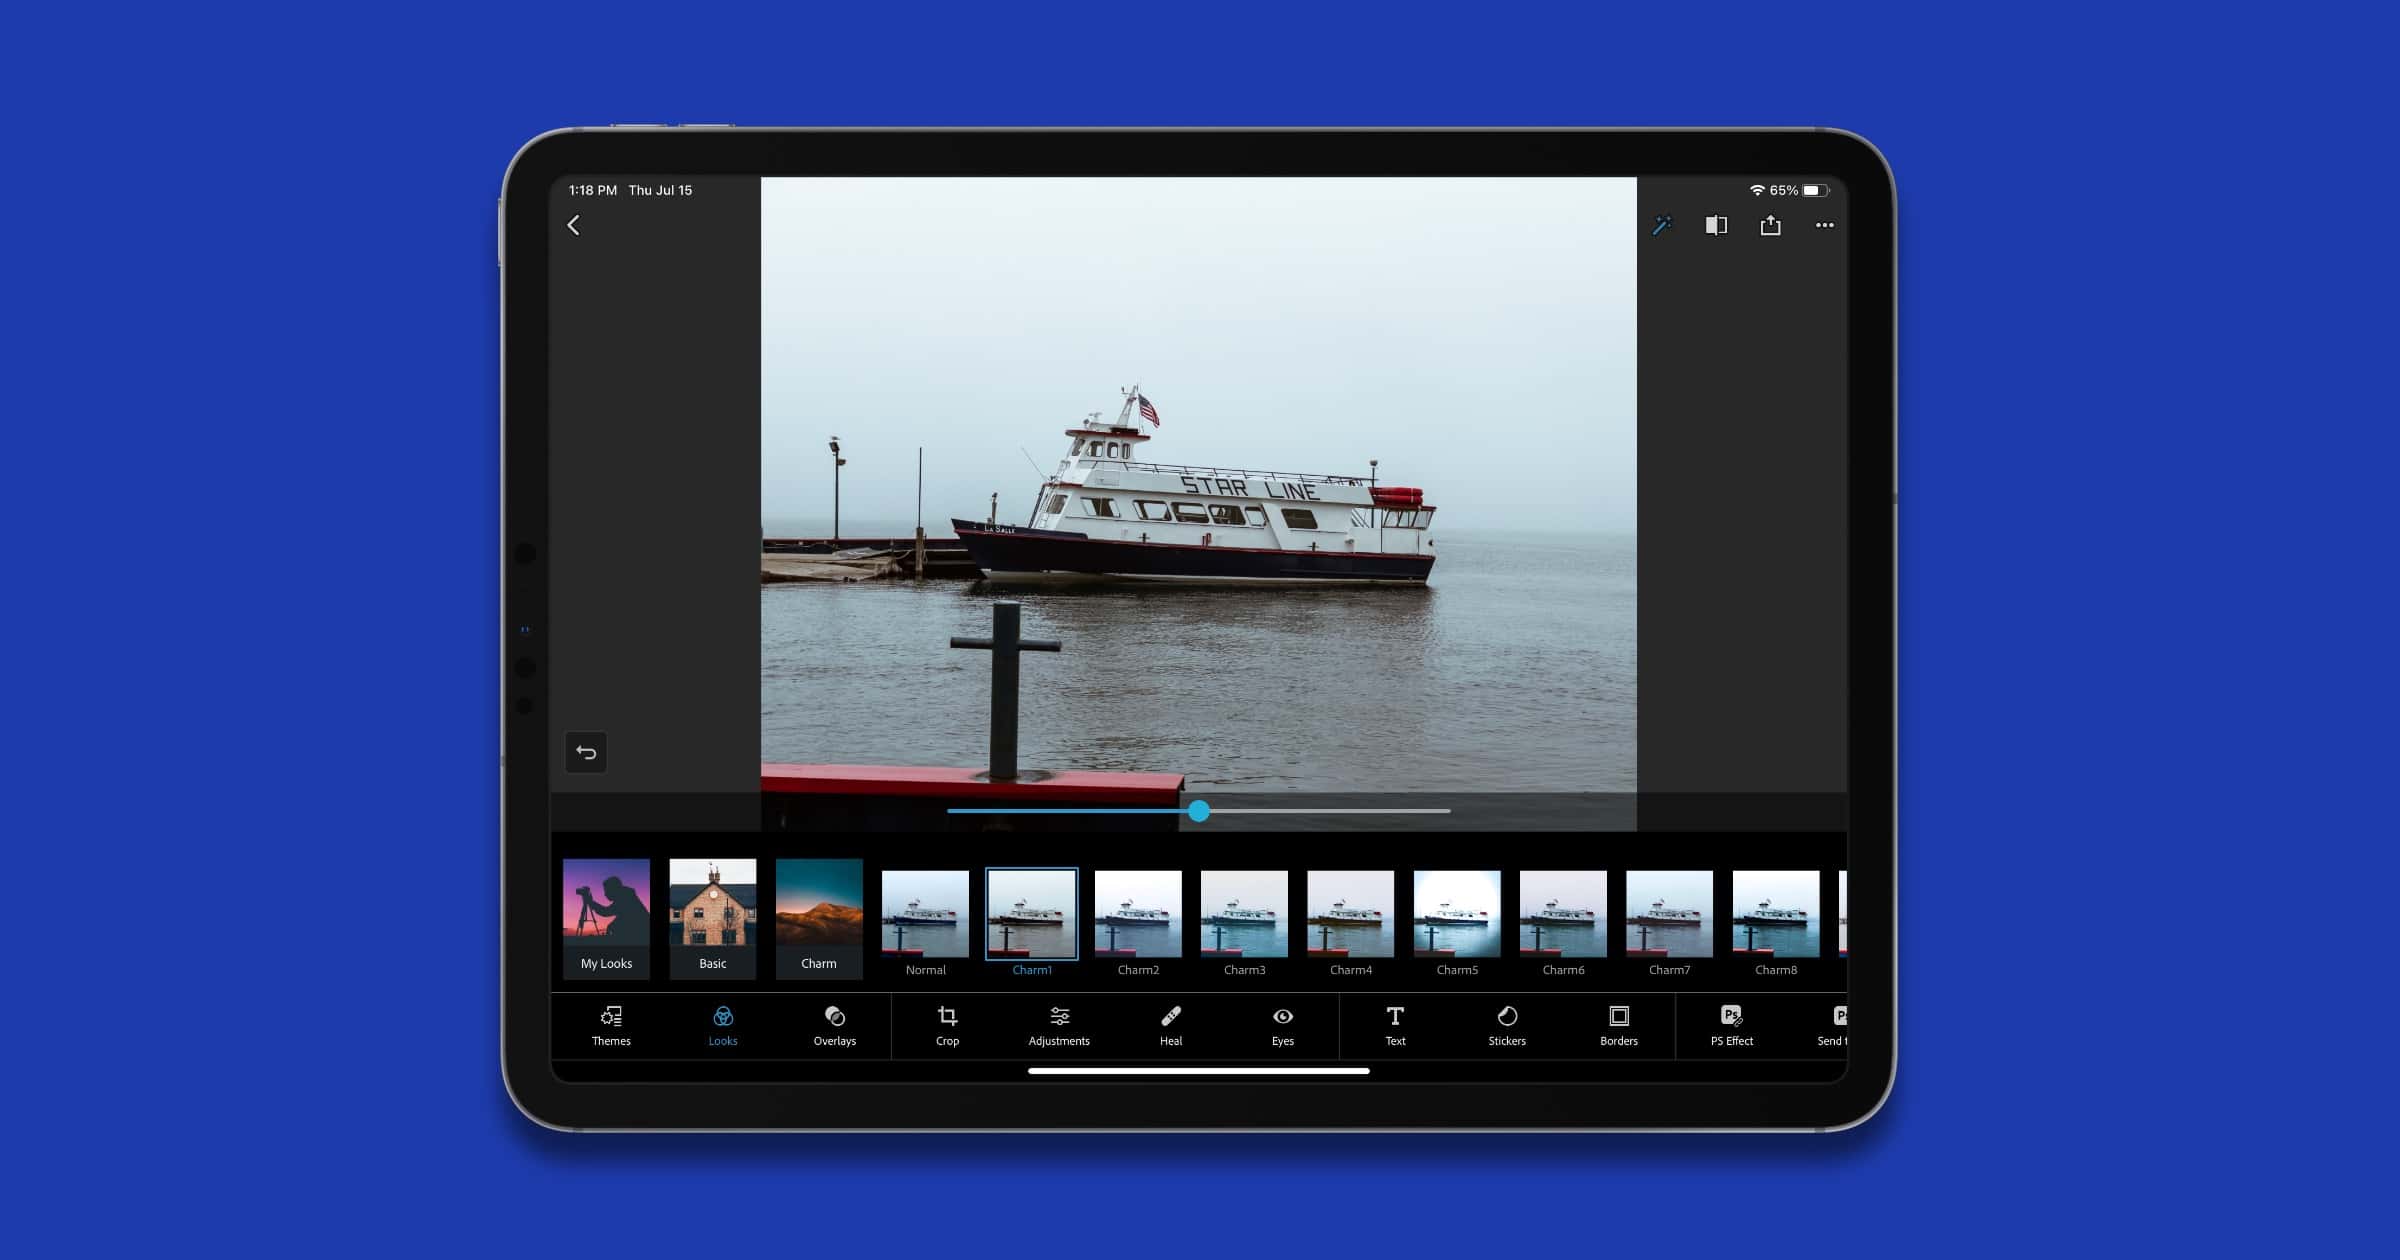 App Review: Adobe’s Photoshop Express is a Good, General-Purpose Editor